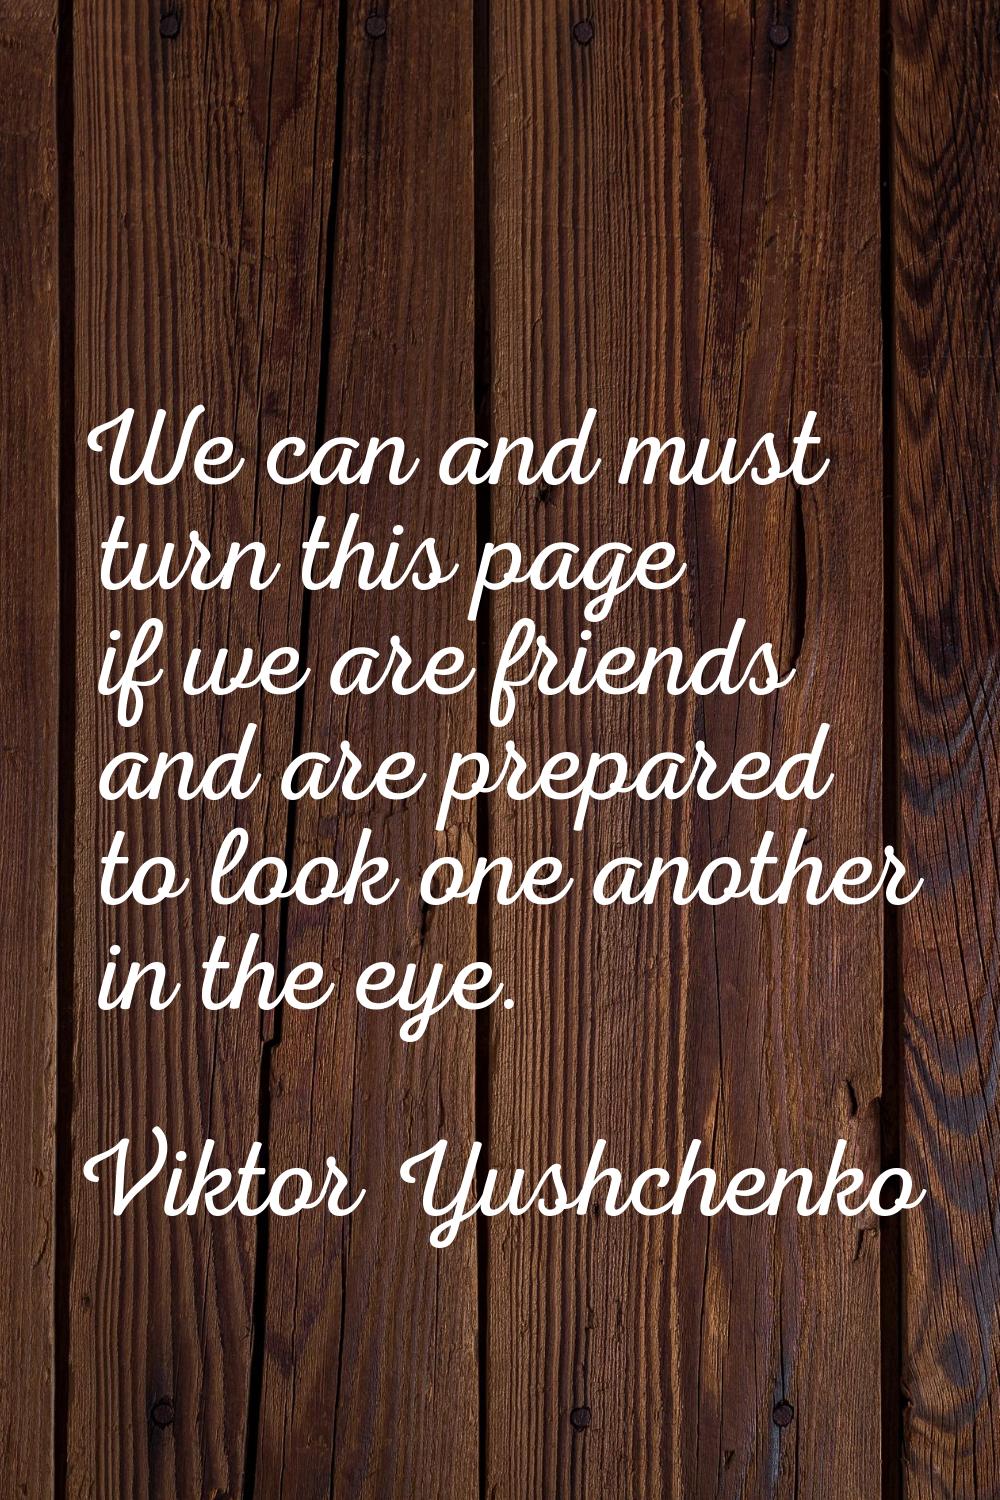 We can and must turn this page if we are friends and are prepared to look one another in the eye.